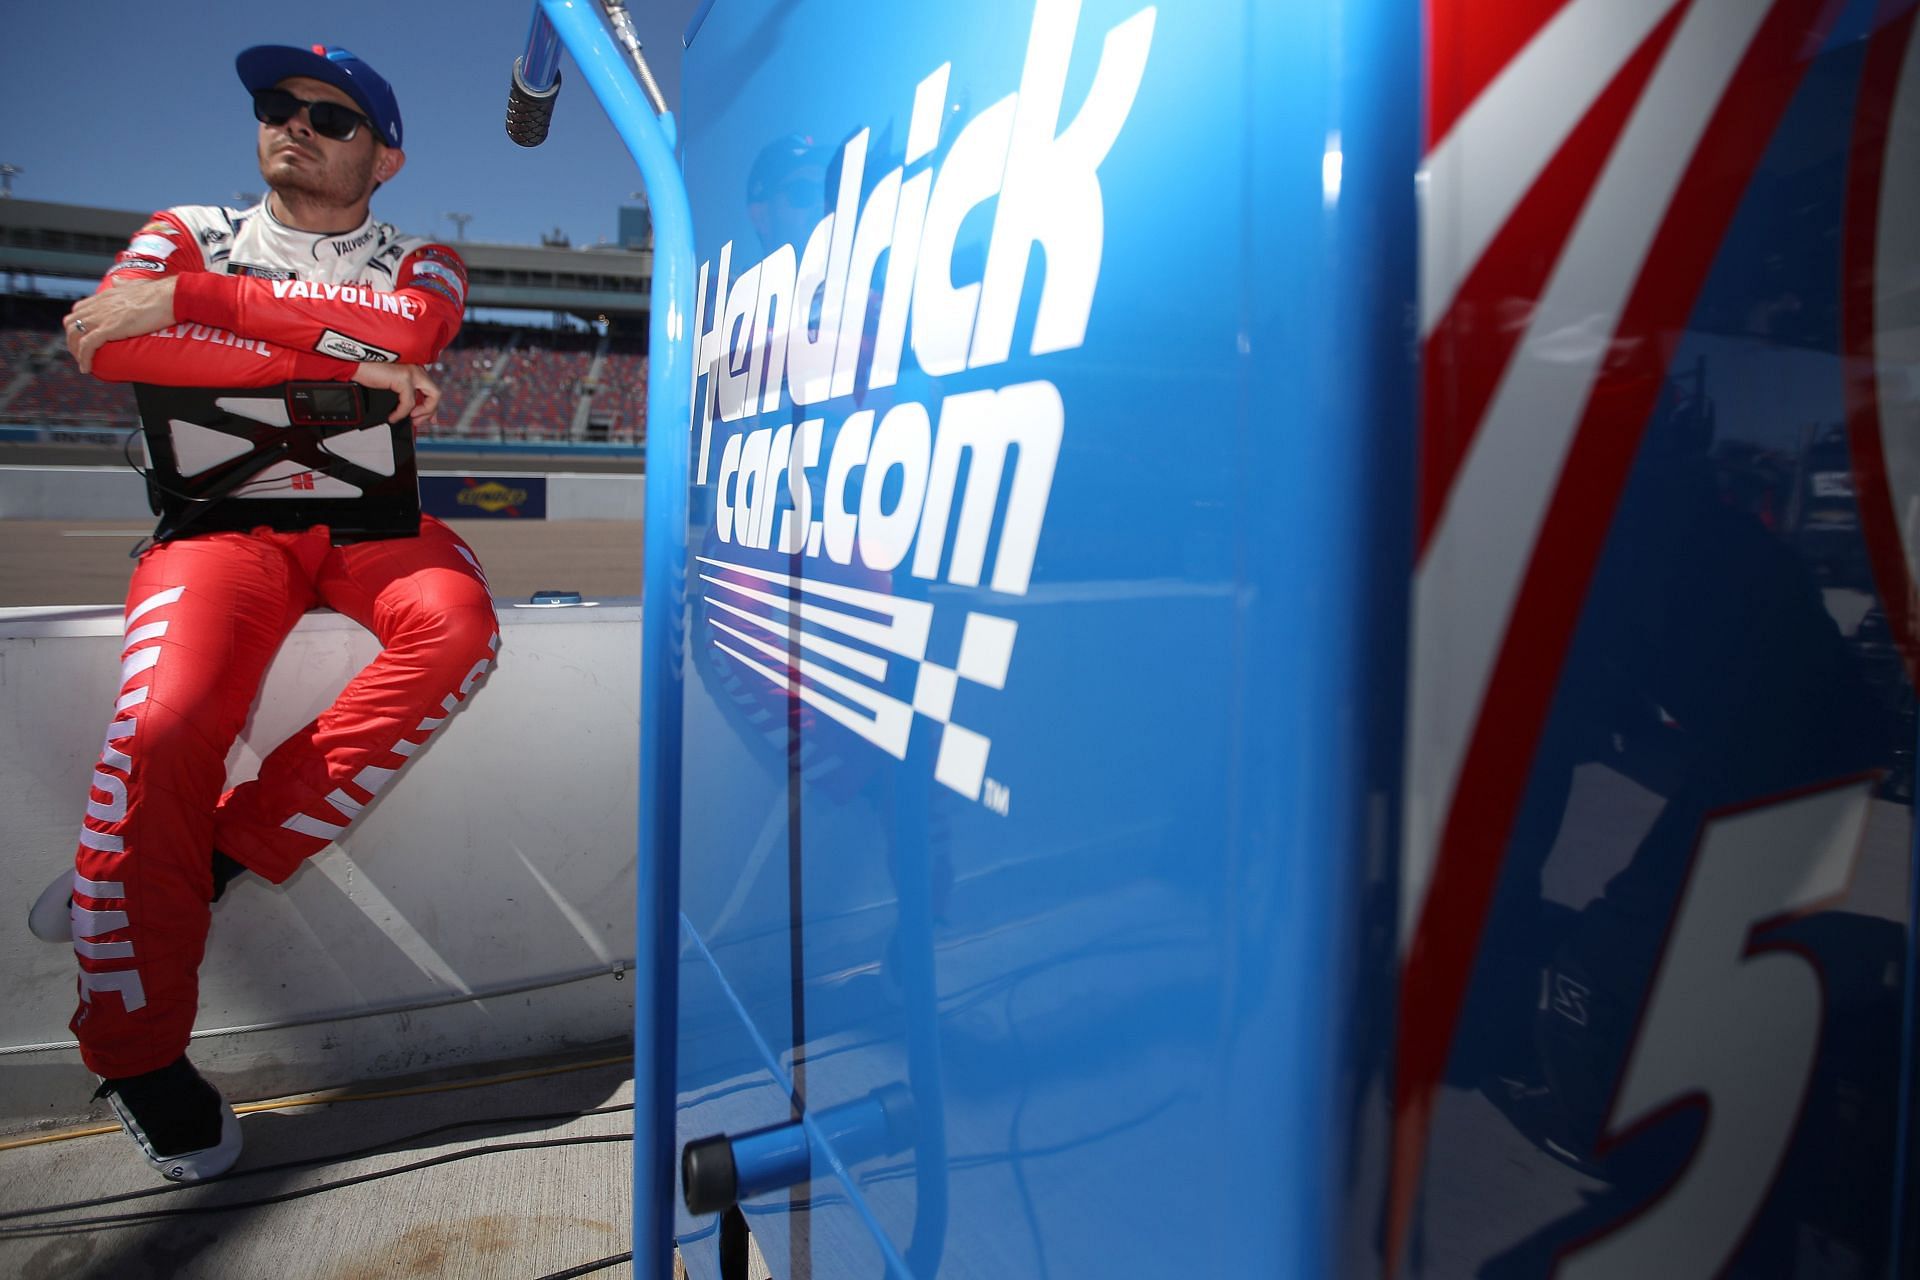 Kyle Larson waits on the grid during qualifying for the Ruoff Mortgage 500 at Phoenix Raceway